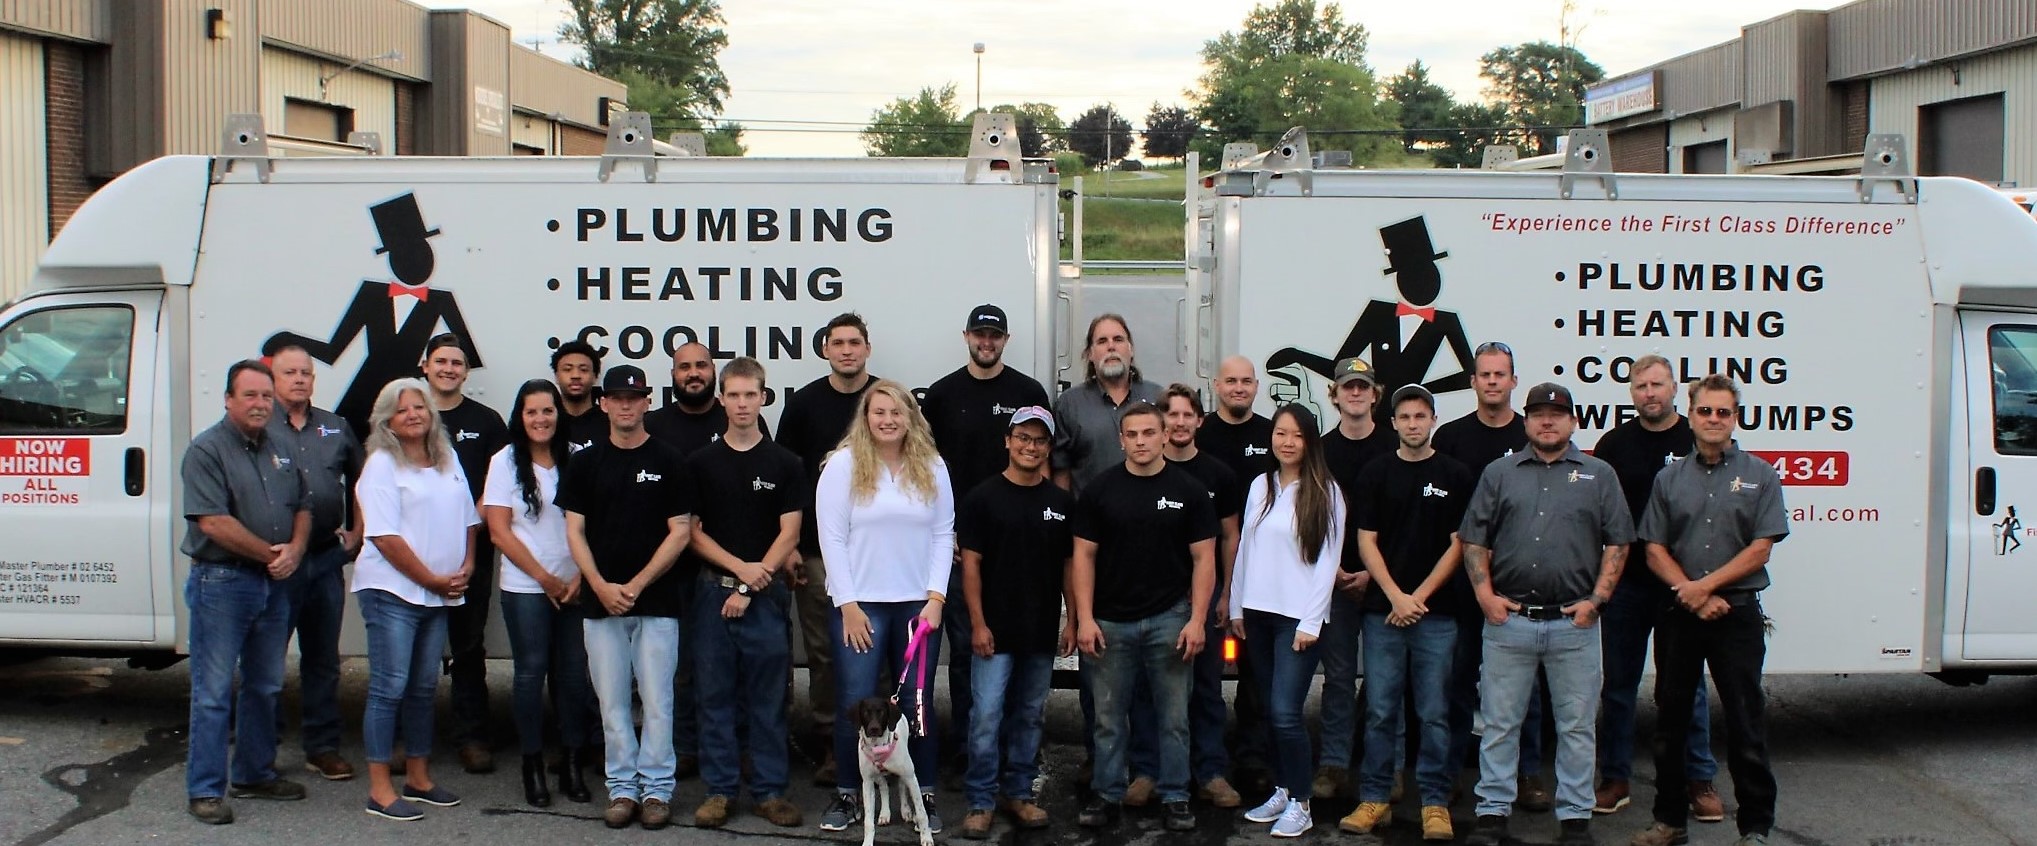 First Class Mechanical Westminster Maryland Plumber and Drain Cleaning